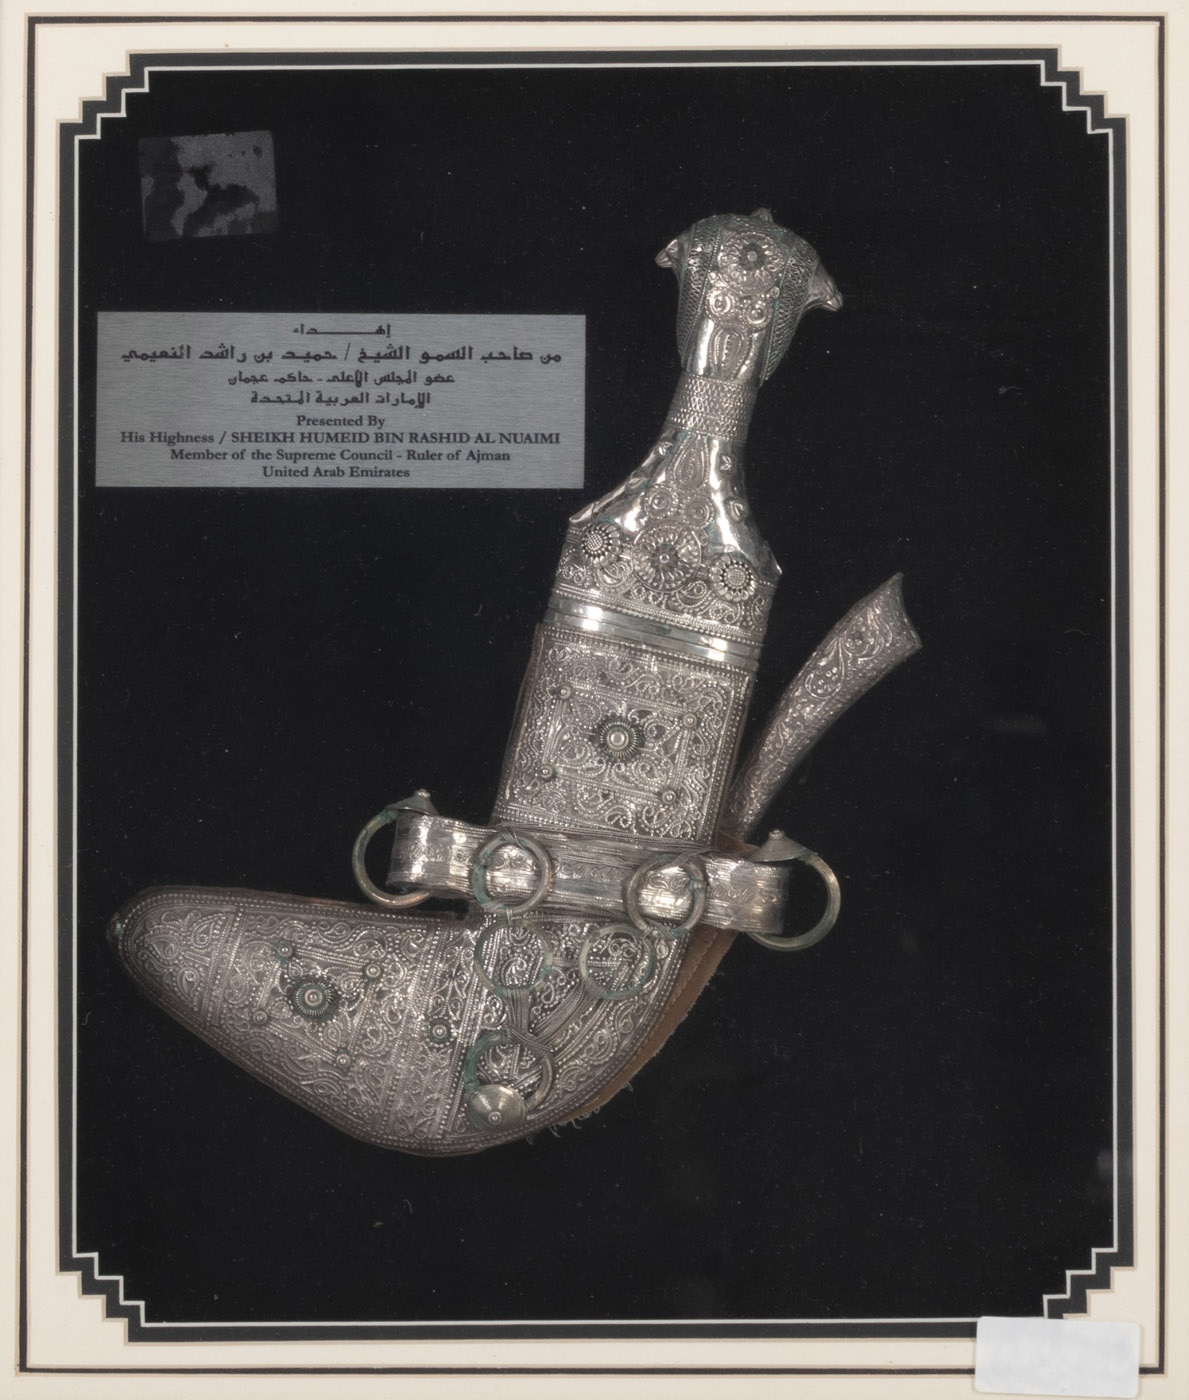 <b>A JAMBIYA DAGGER WITH SILVER APPLIQUE WORK WITHIN A FRAME</b>